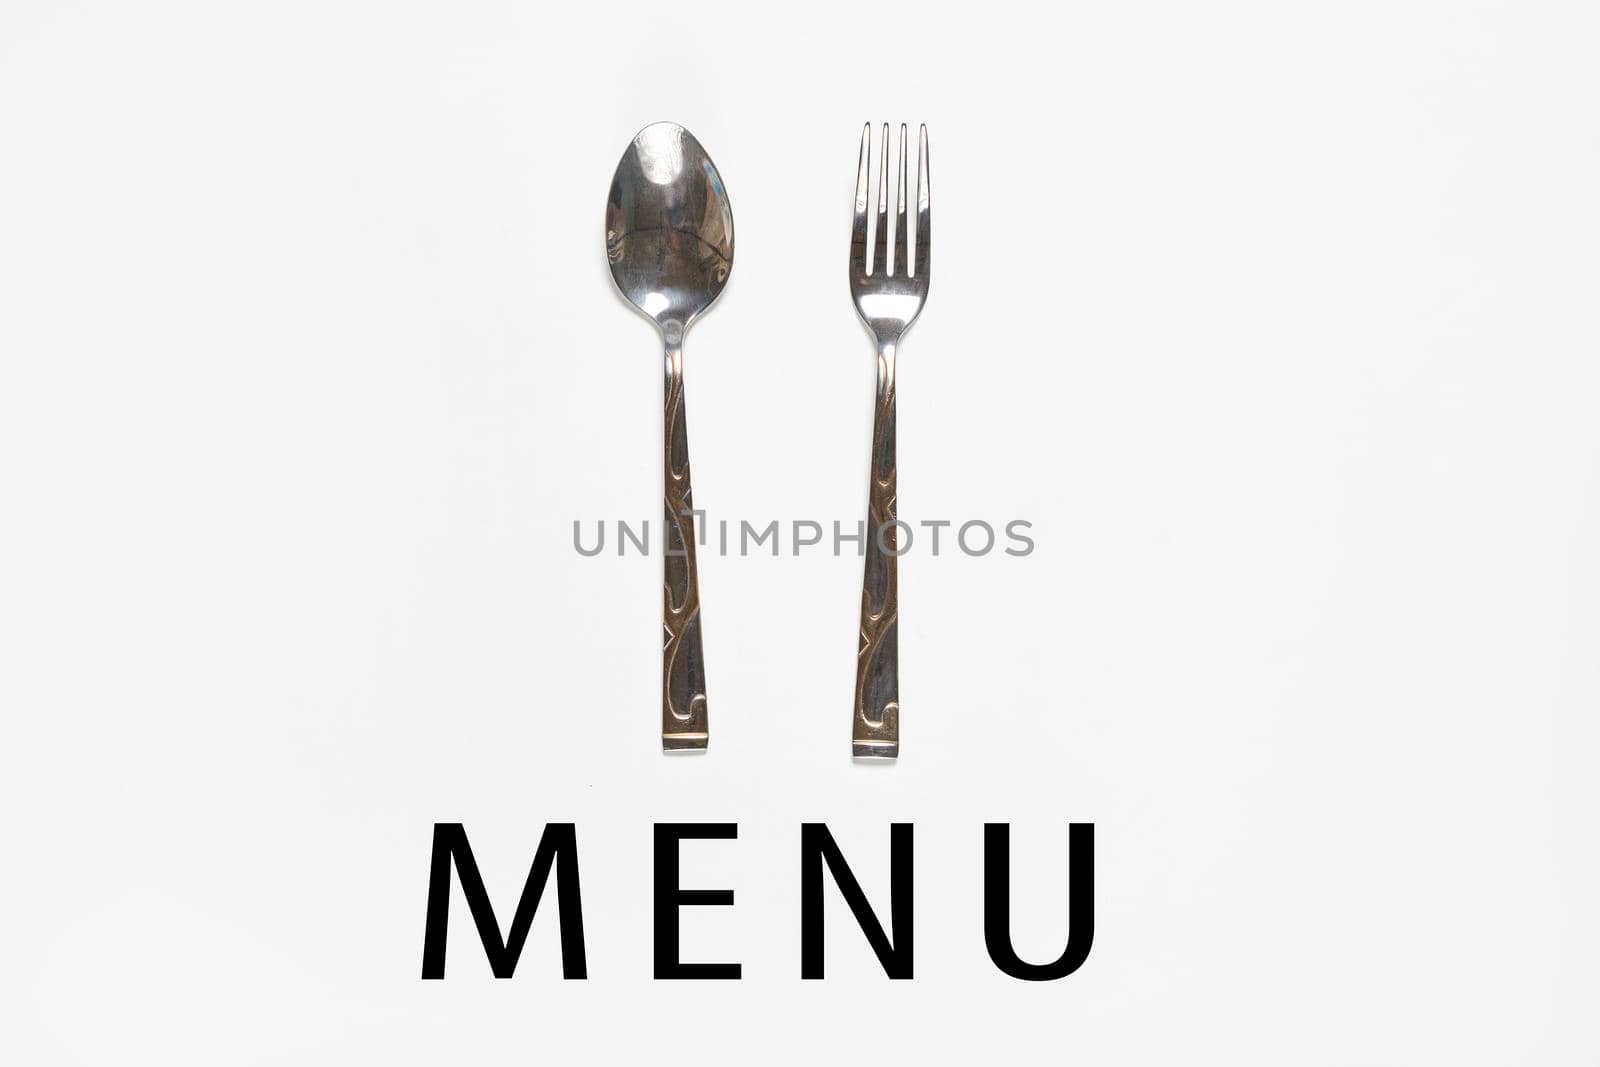 Restaurant menu - Fork, spoon and knife on white background